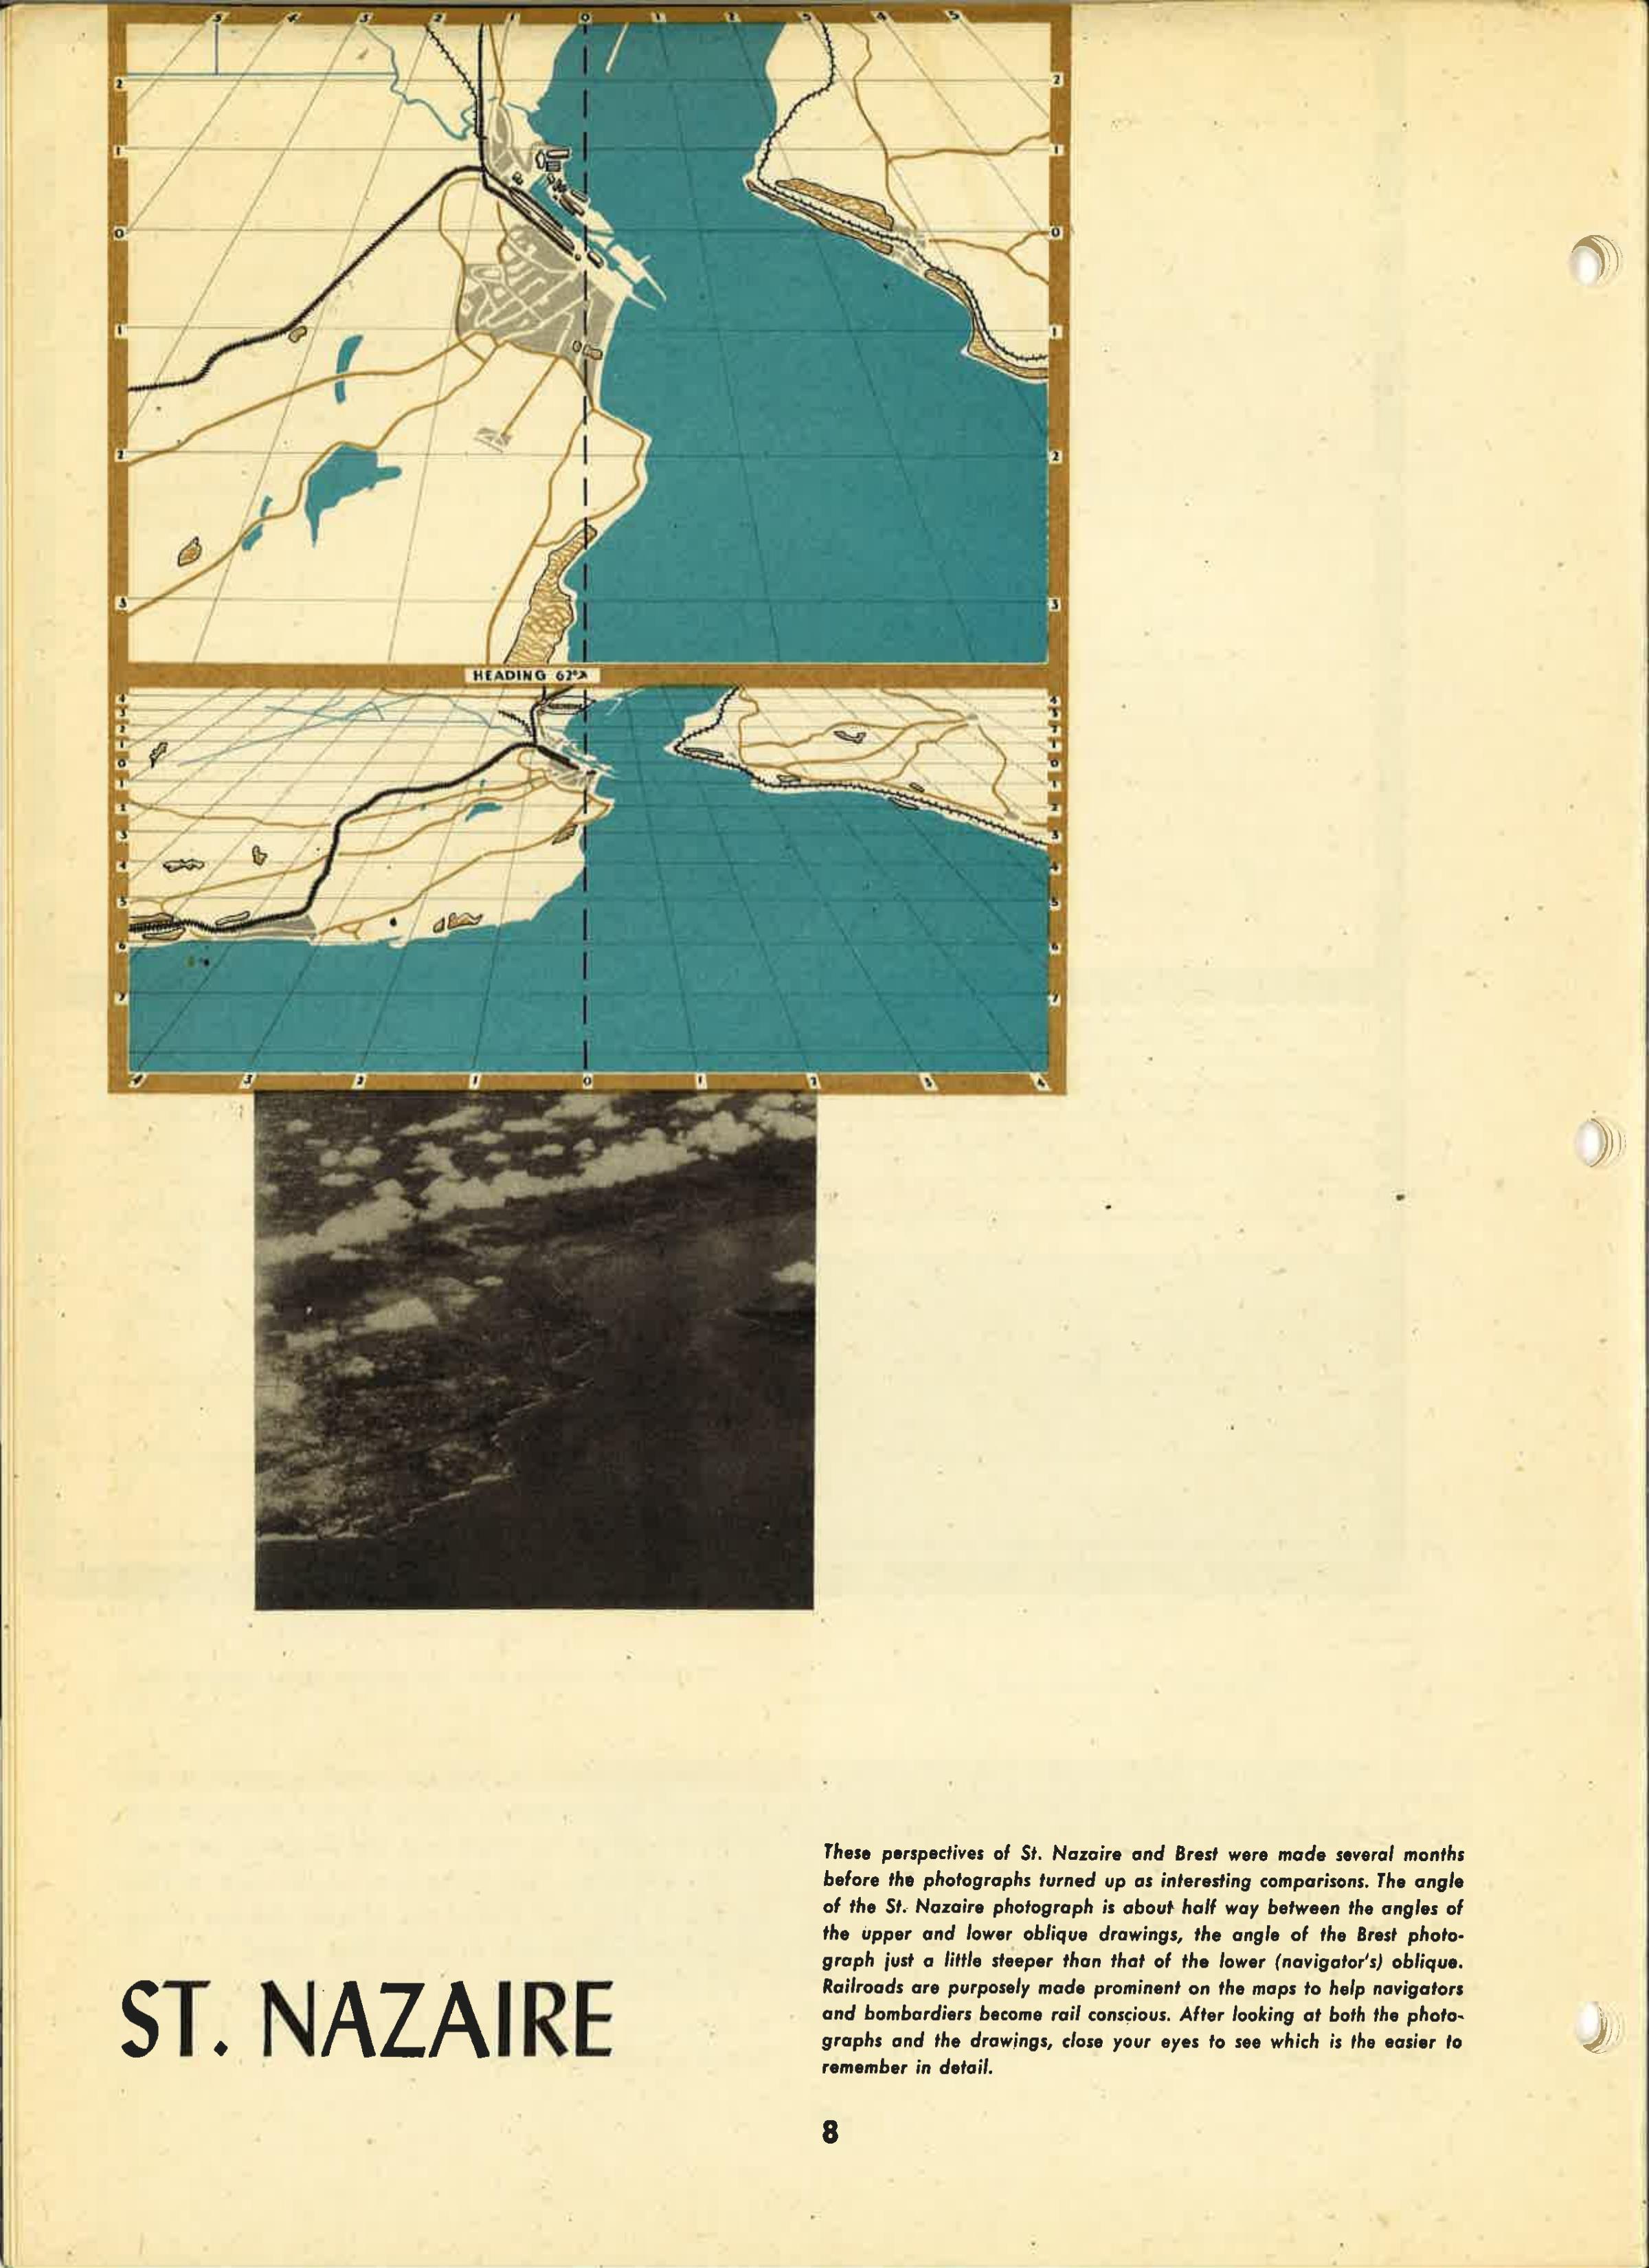 Sample page 9 from AirCorps Library document: Aids for Navigators and Bombardiers